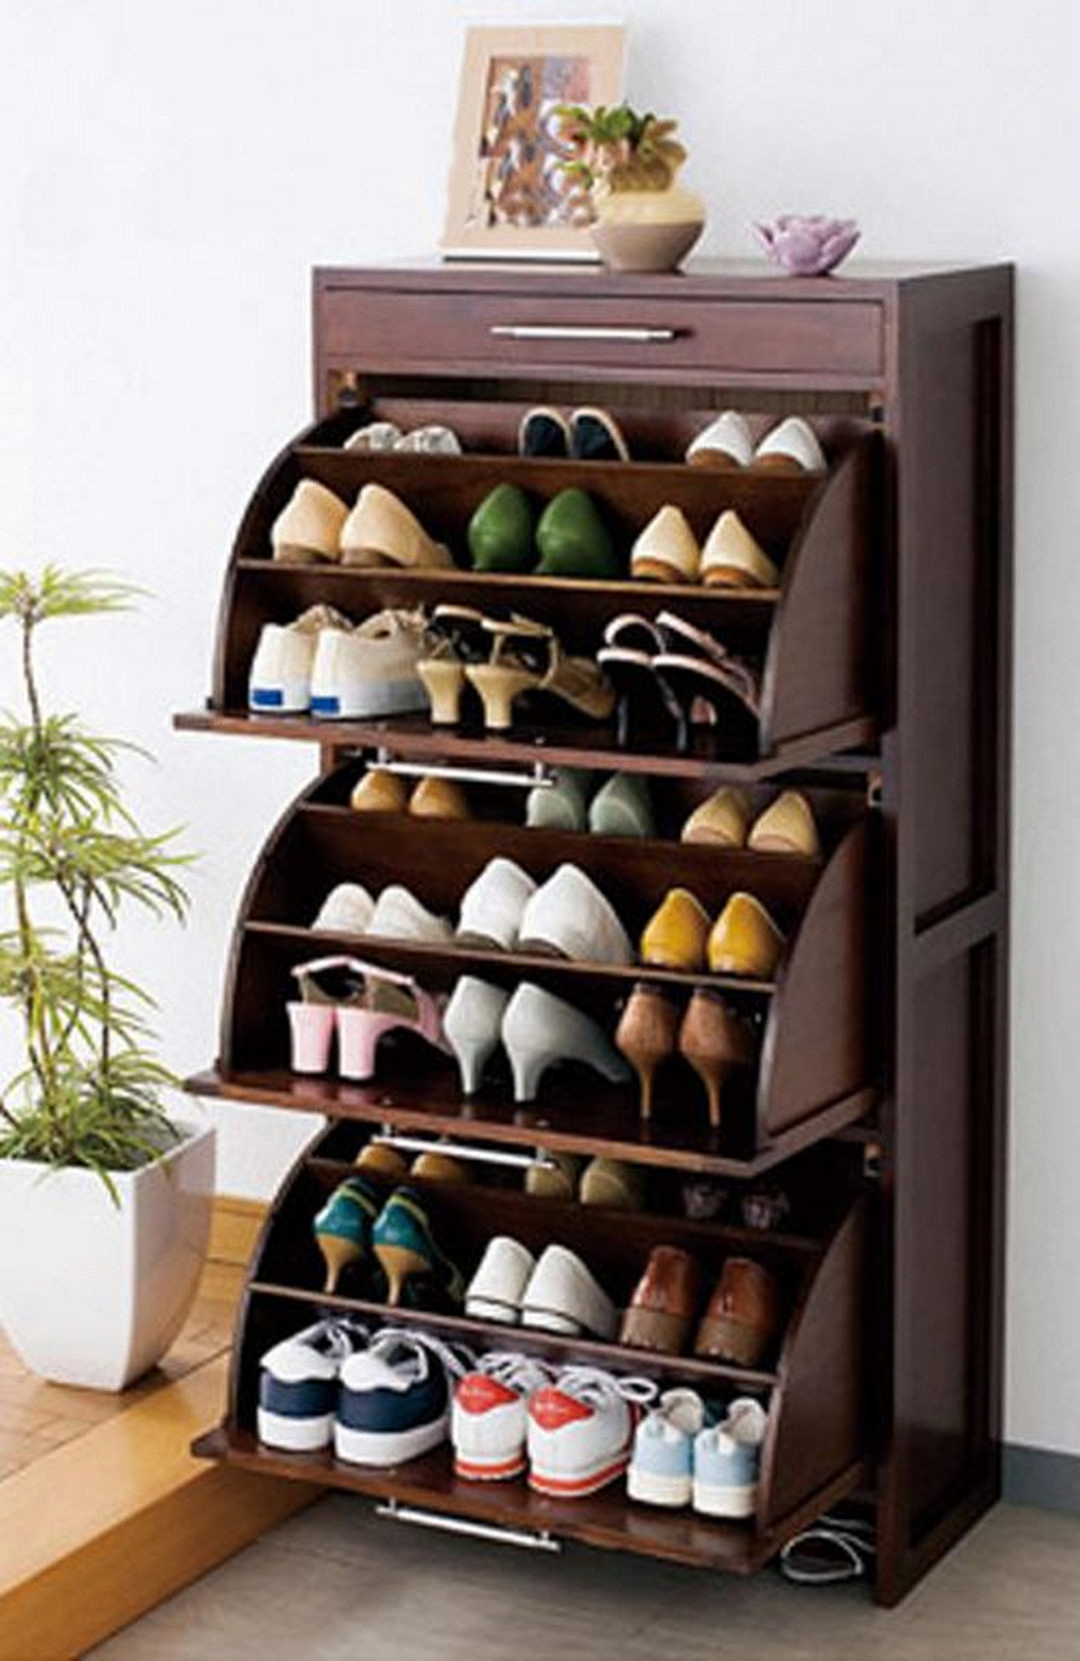 Practical shoes rack design ideas for small homes rack